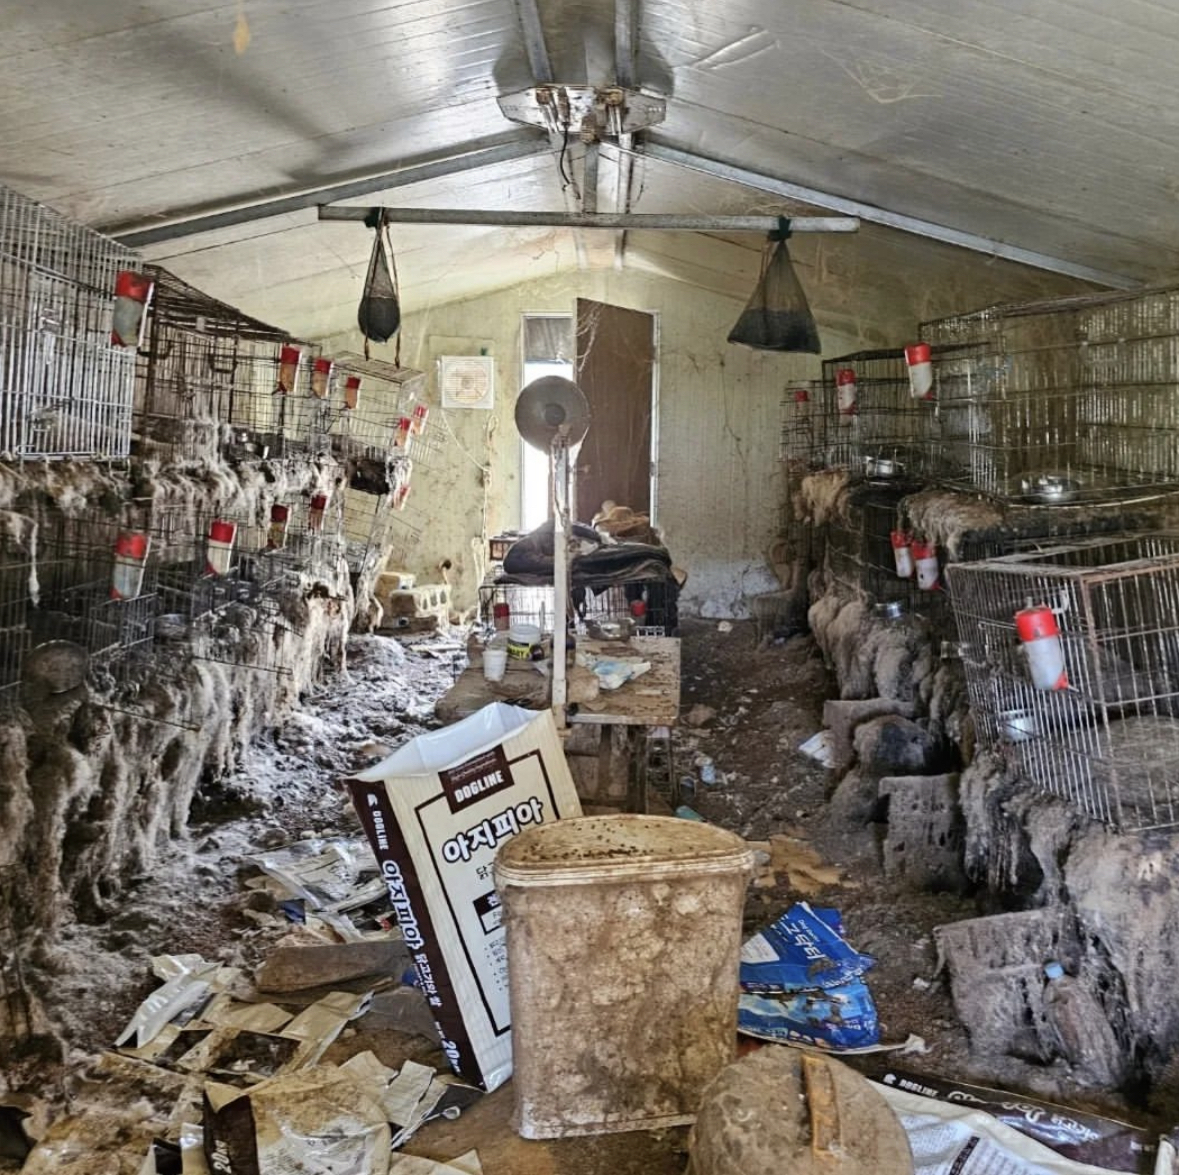 A picture shows the inside of an illegal breeding facility in Jinan-gun, North Jeolla Province, on May 2. (Courtesy of TBT Rescue’s Instagram)